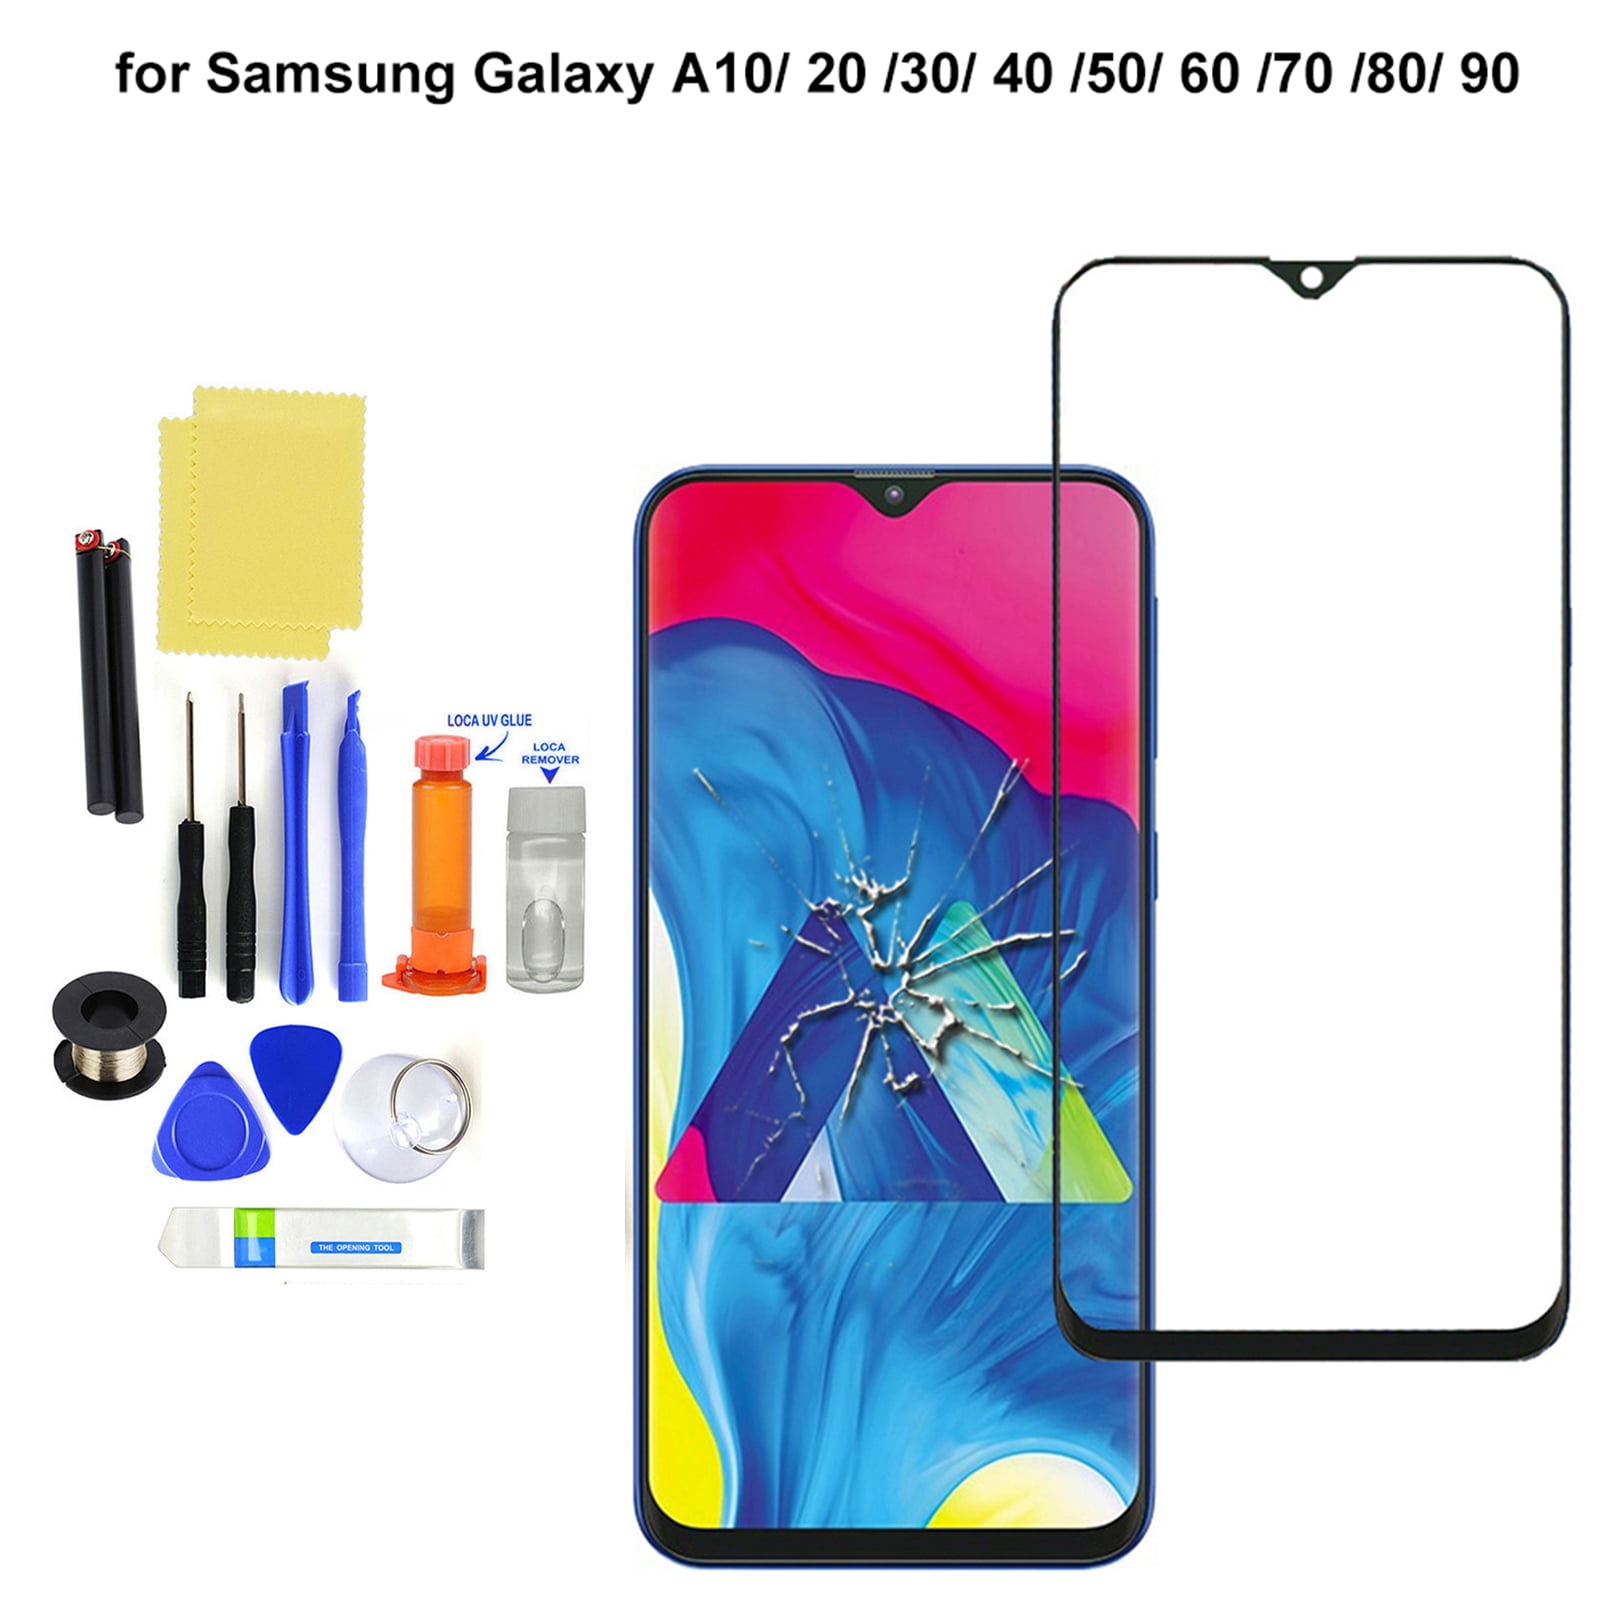 Cracked Shattered Phone for Samsung Galaxy A40 with Screen Repair Kit for Replace Your Damaged for Galaxy A10/A20/A30/A40/A50/A60/A70/A80/A90 Screen Replacement